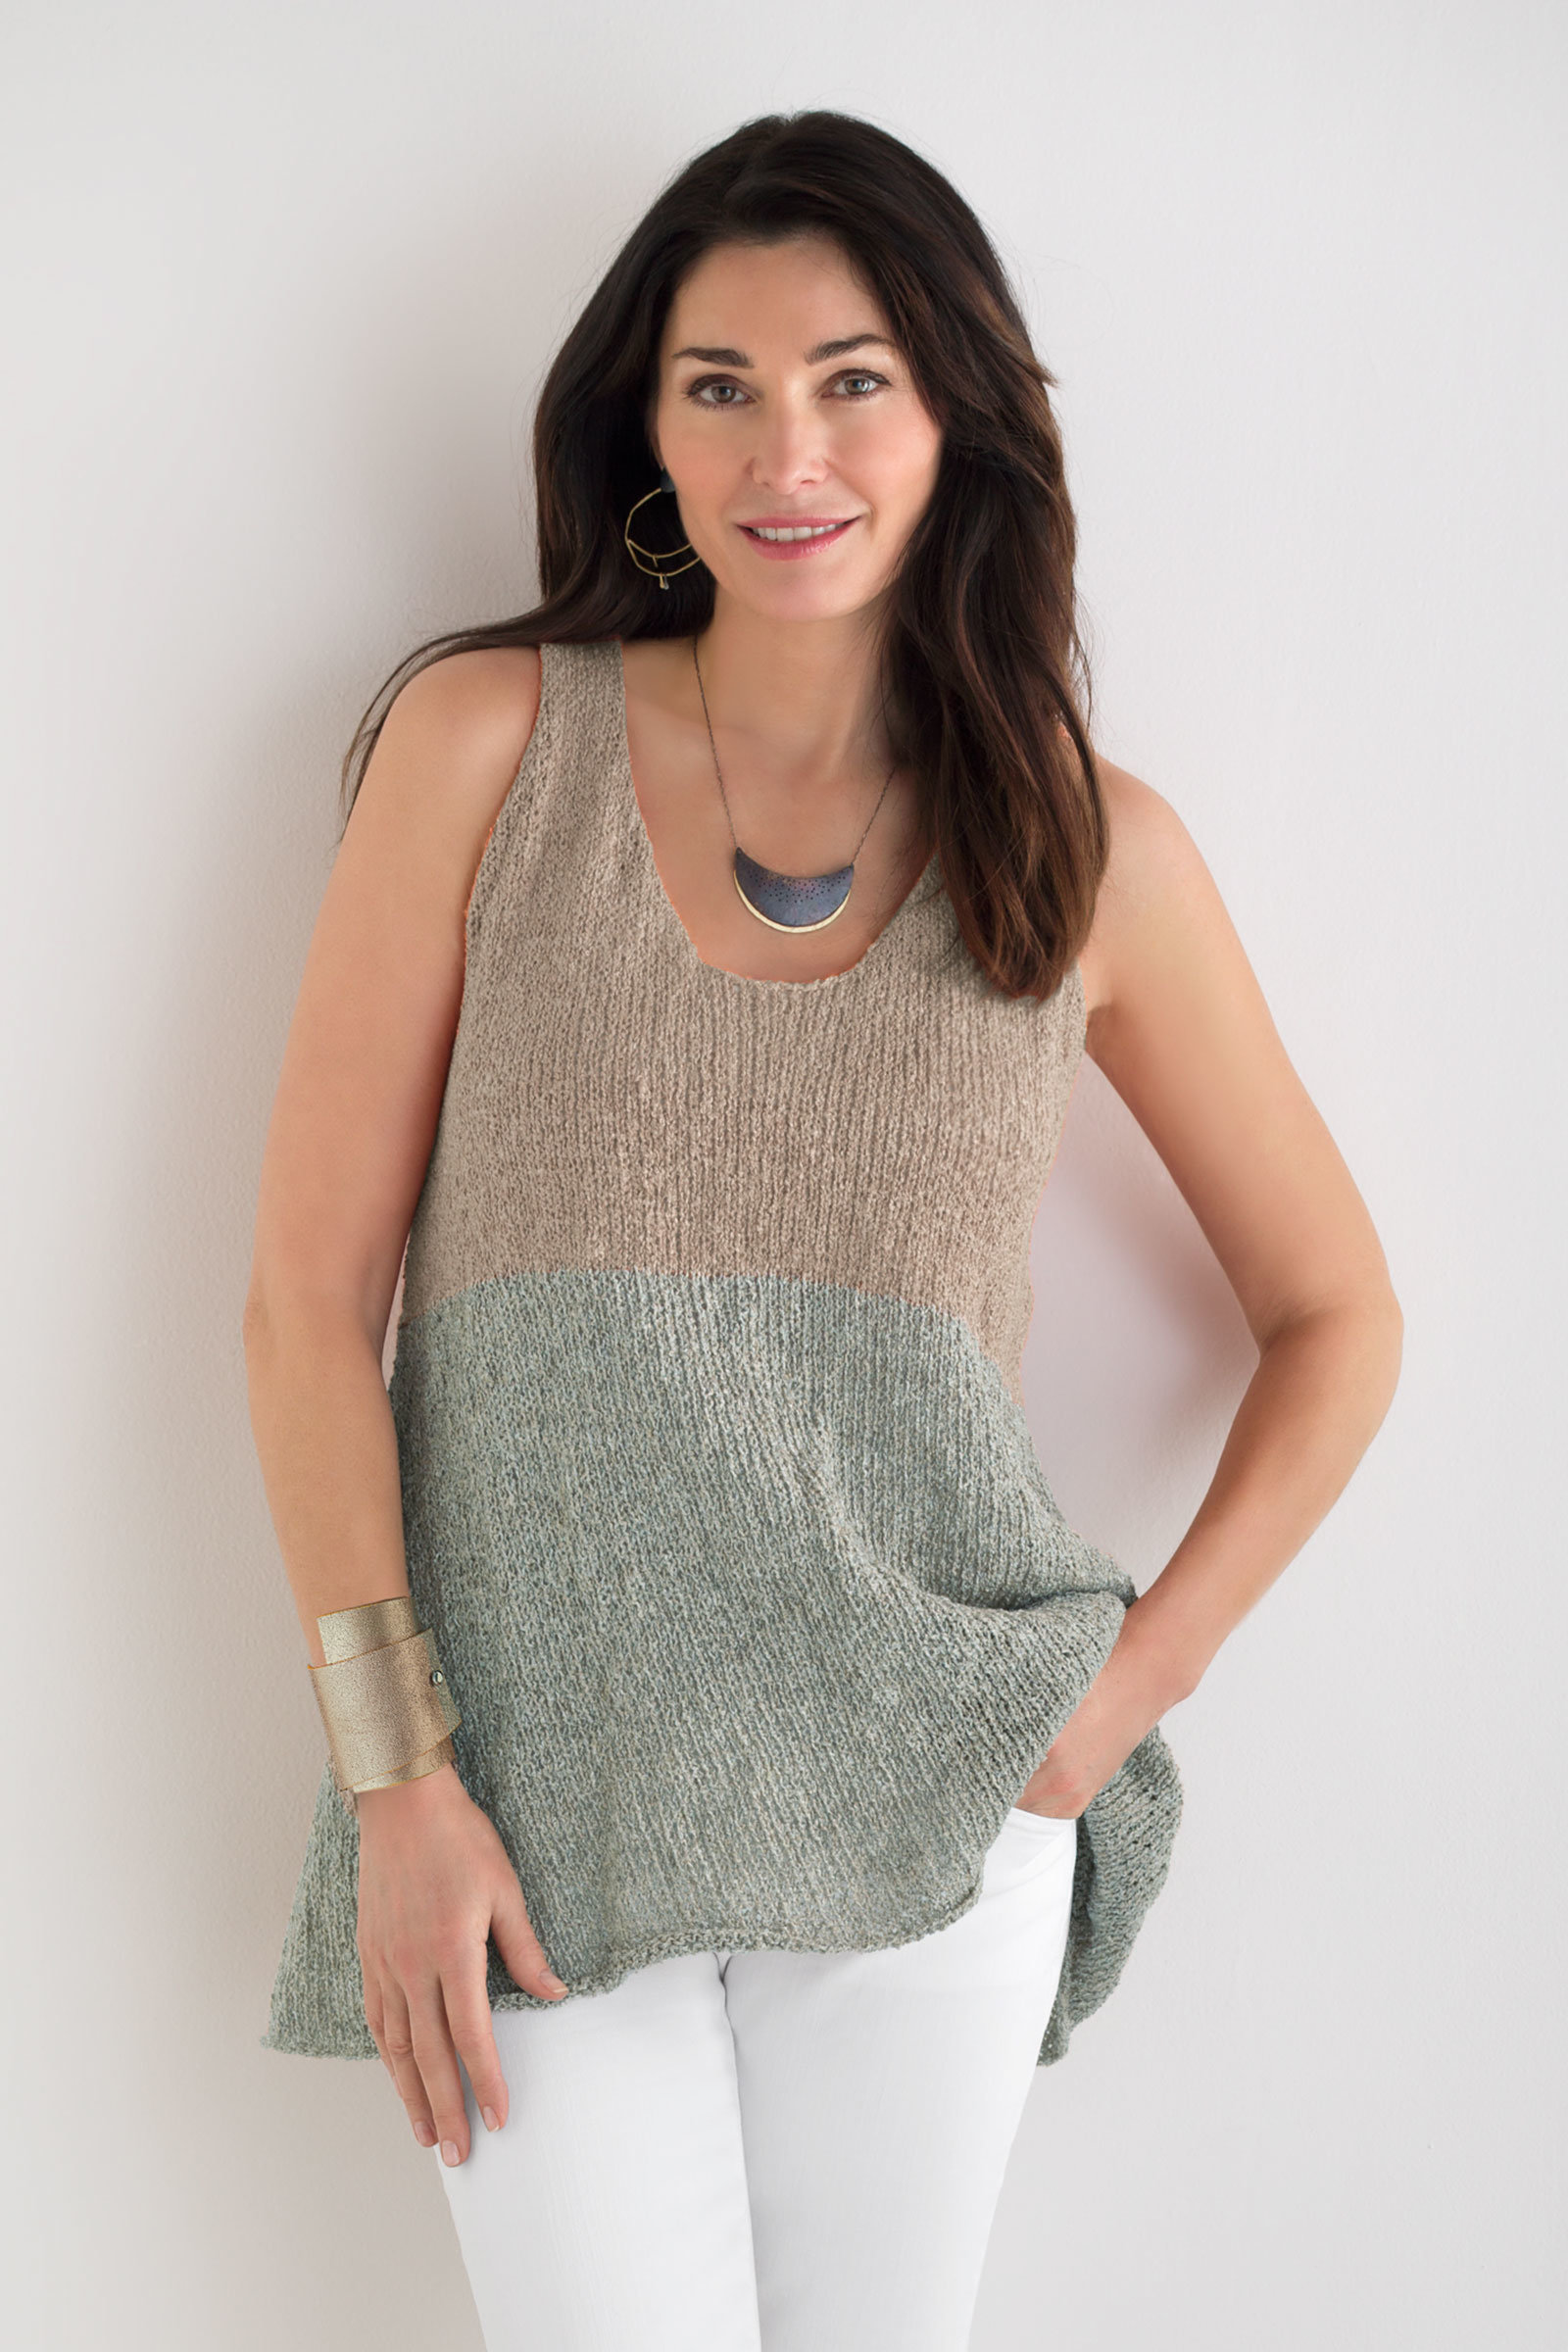 Abstract Tank by Amy Brill Sweaters (Knit Tank) | Artful Home